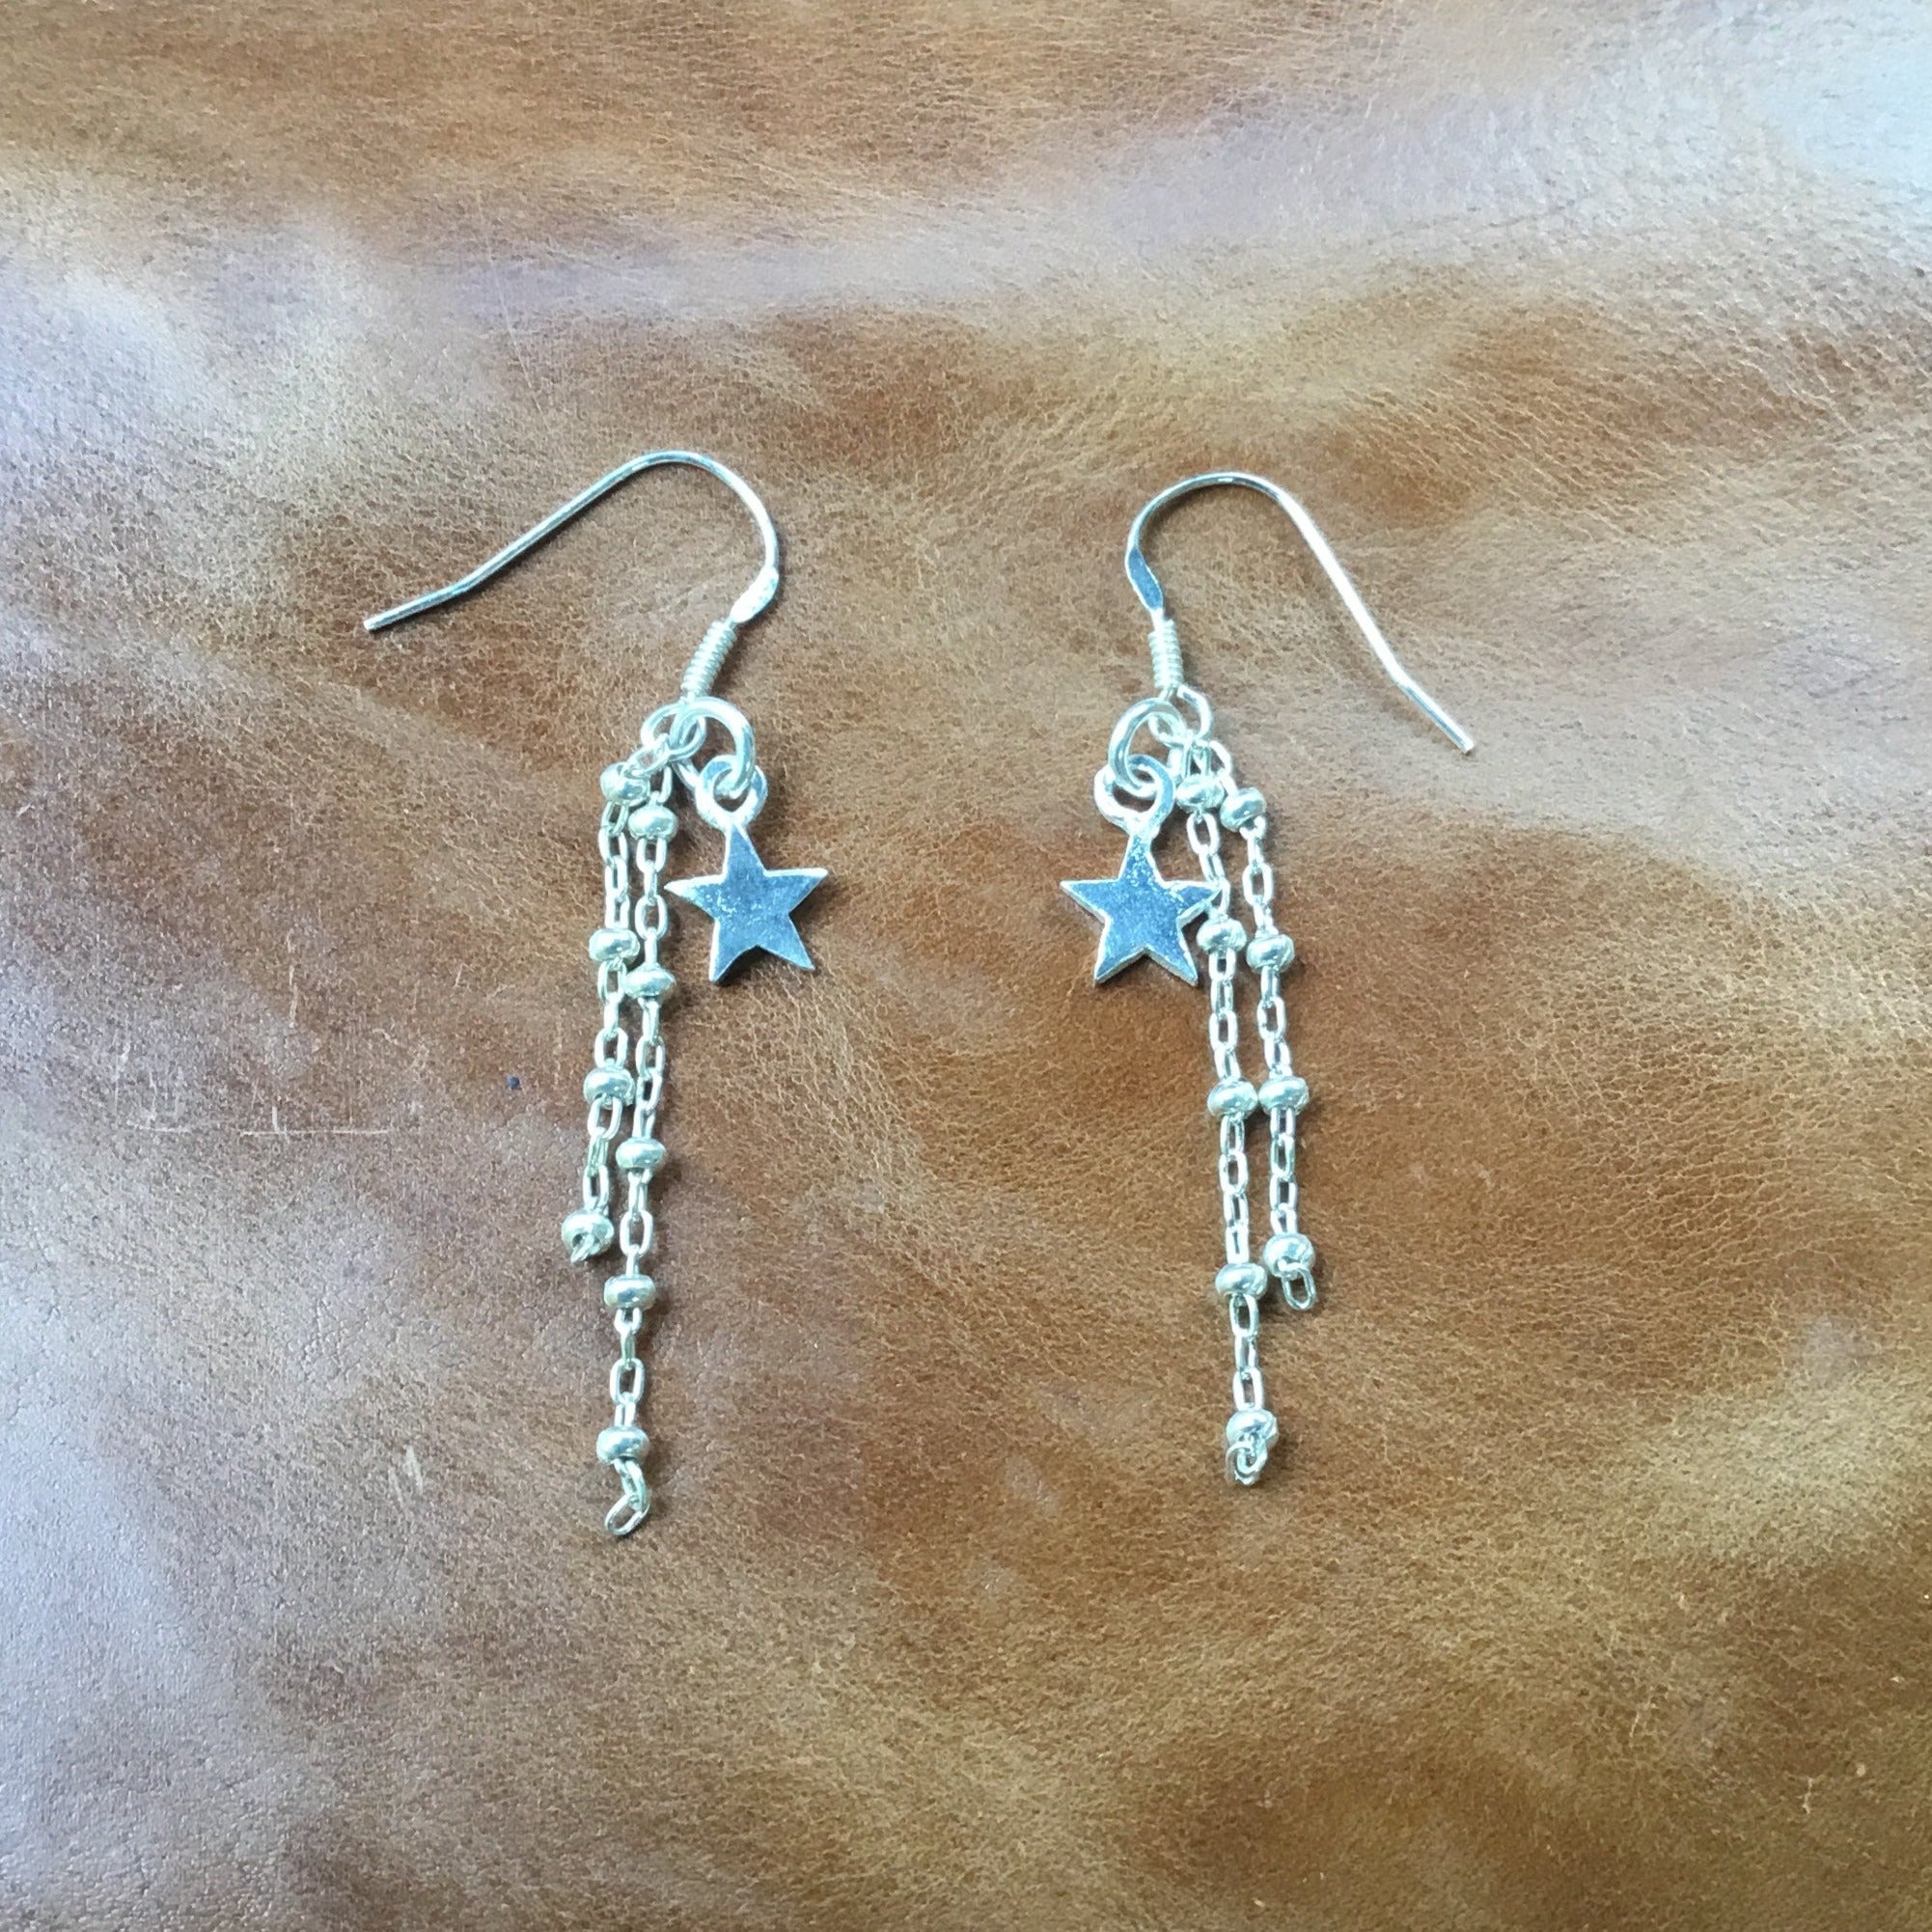 Discover 175+ dangle earrings meaning